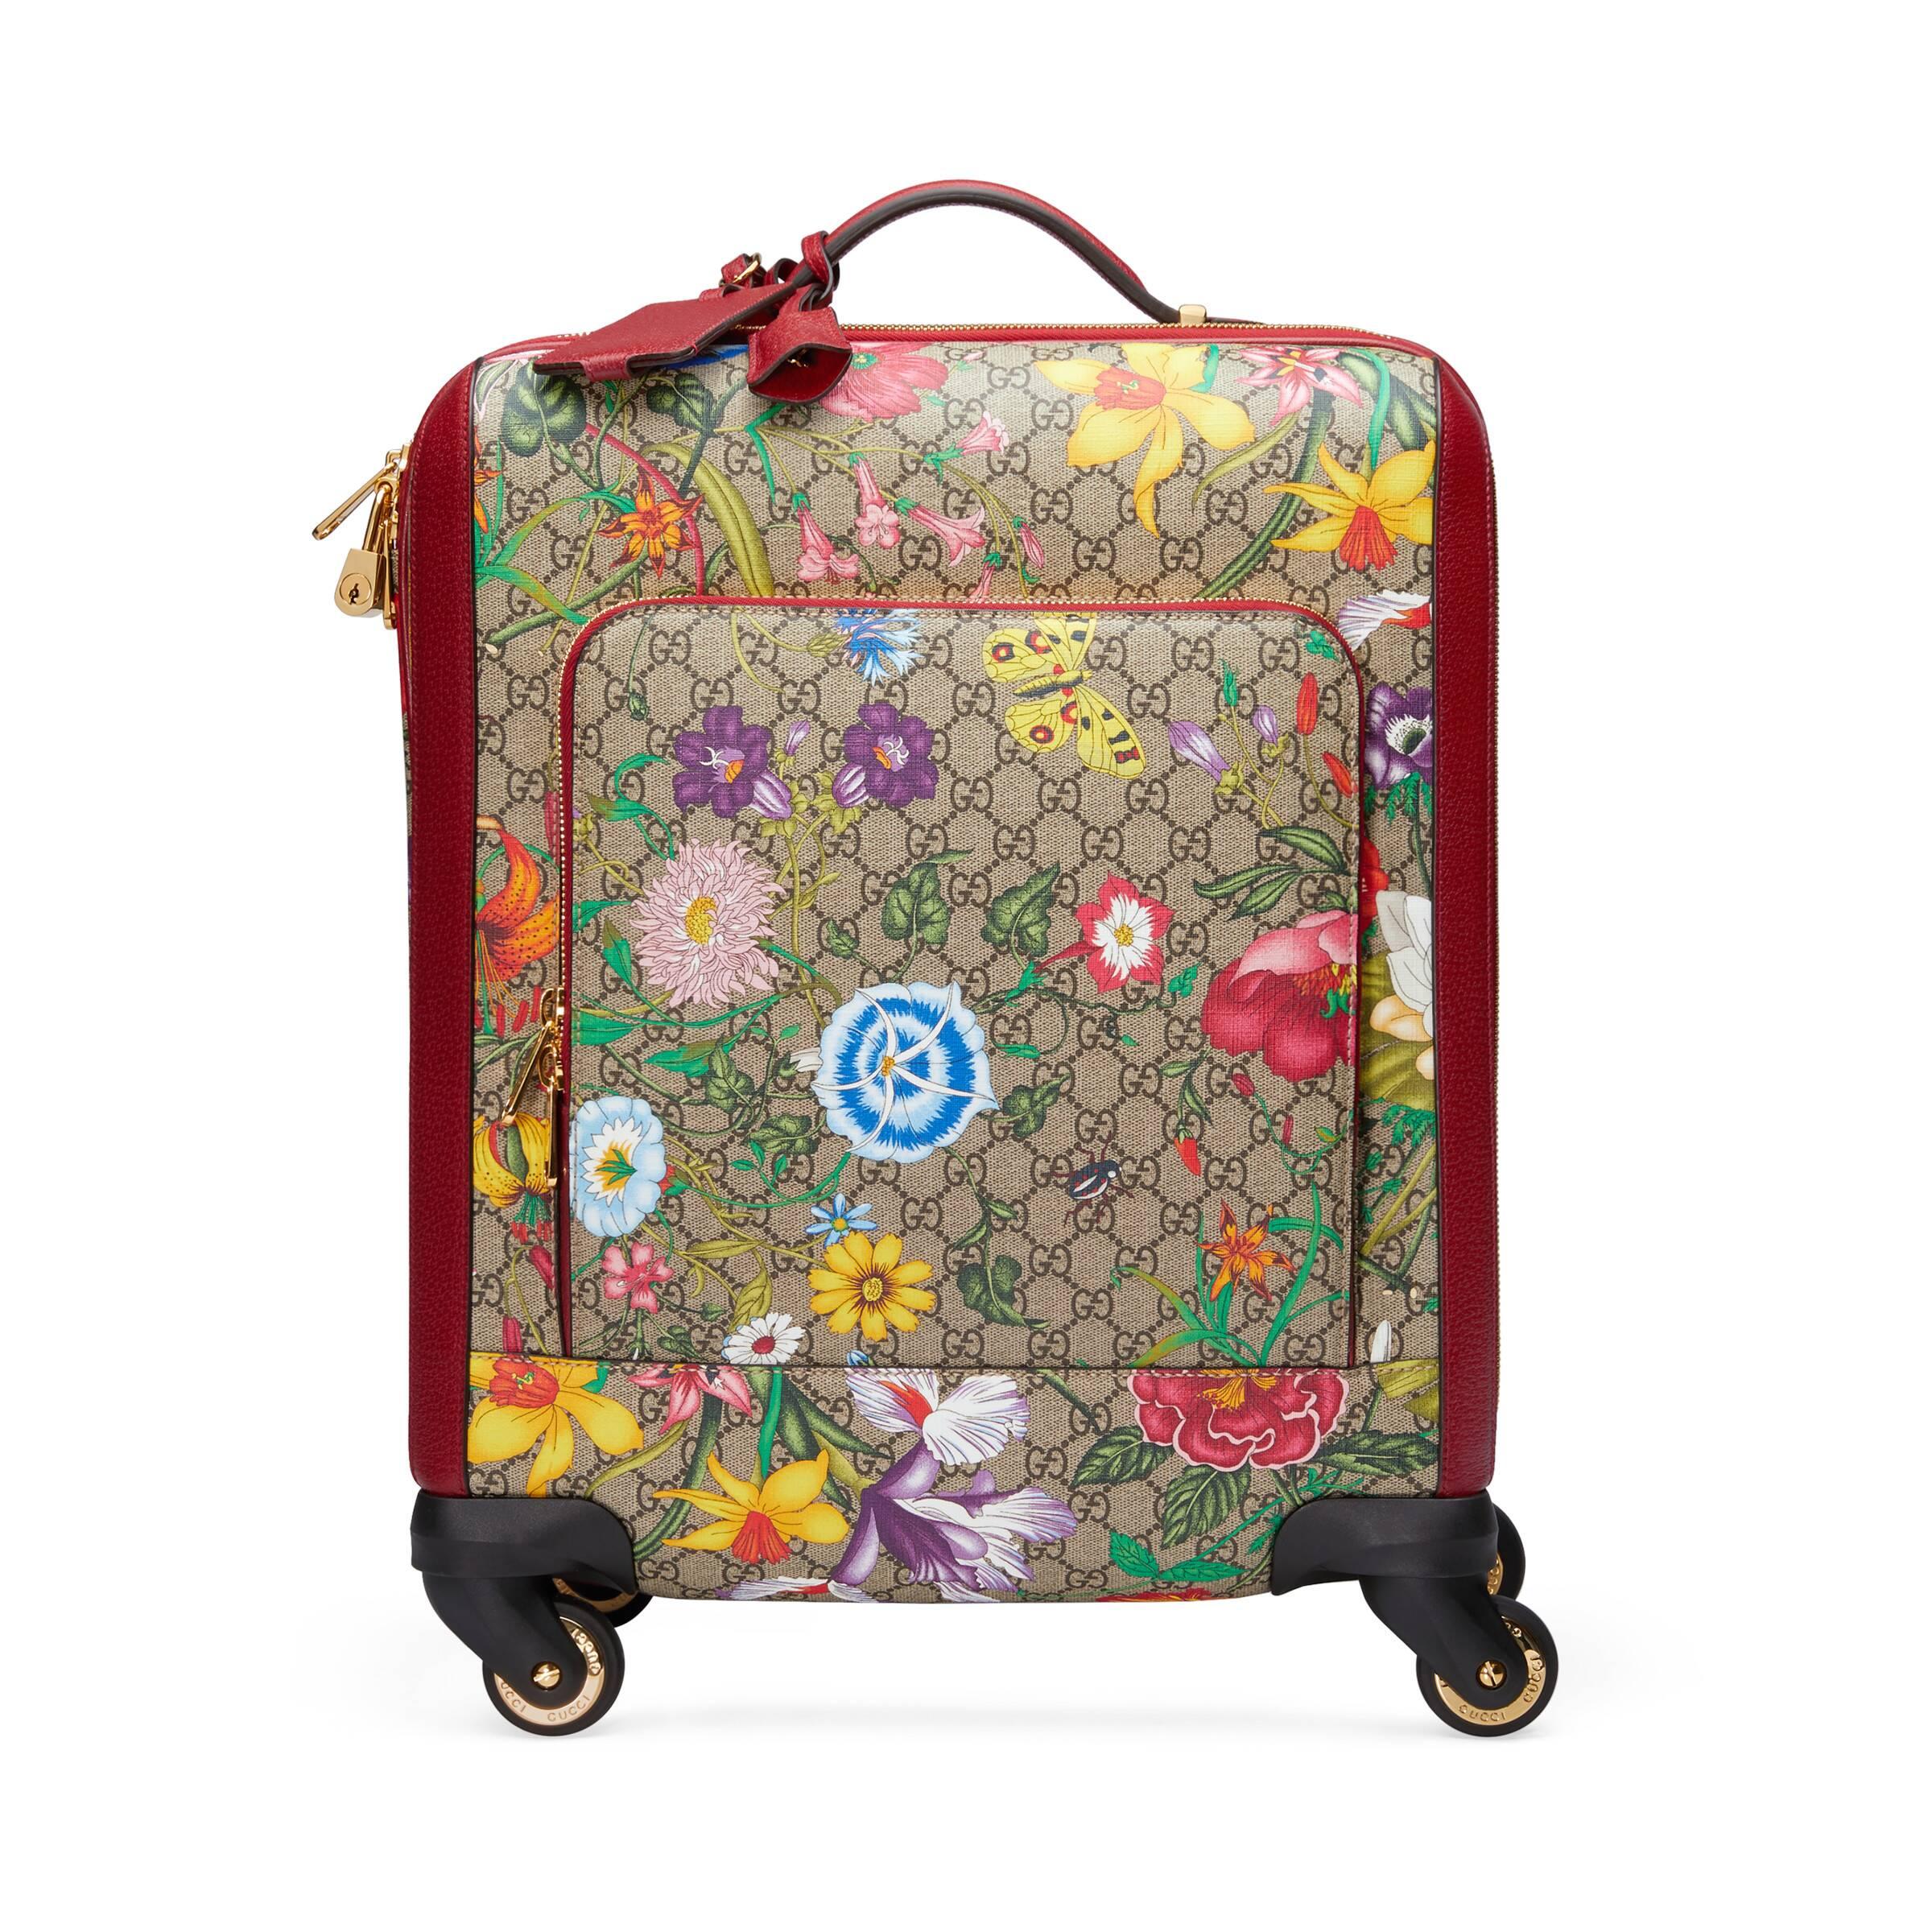 Gucci Porter Carry On Suitcase in Multicoloured - Gucci